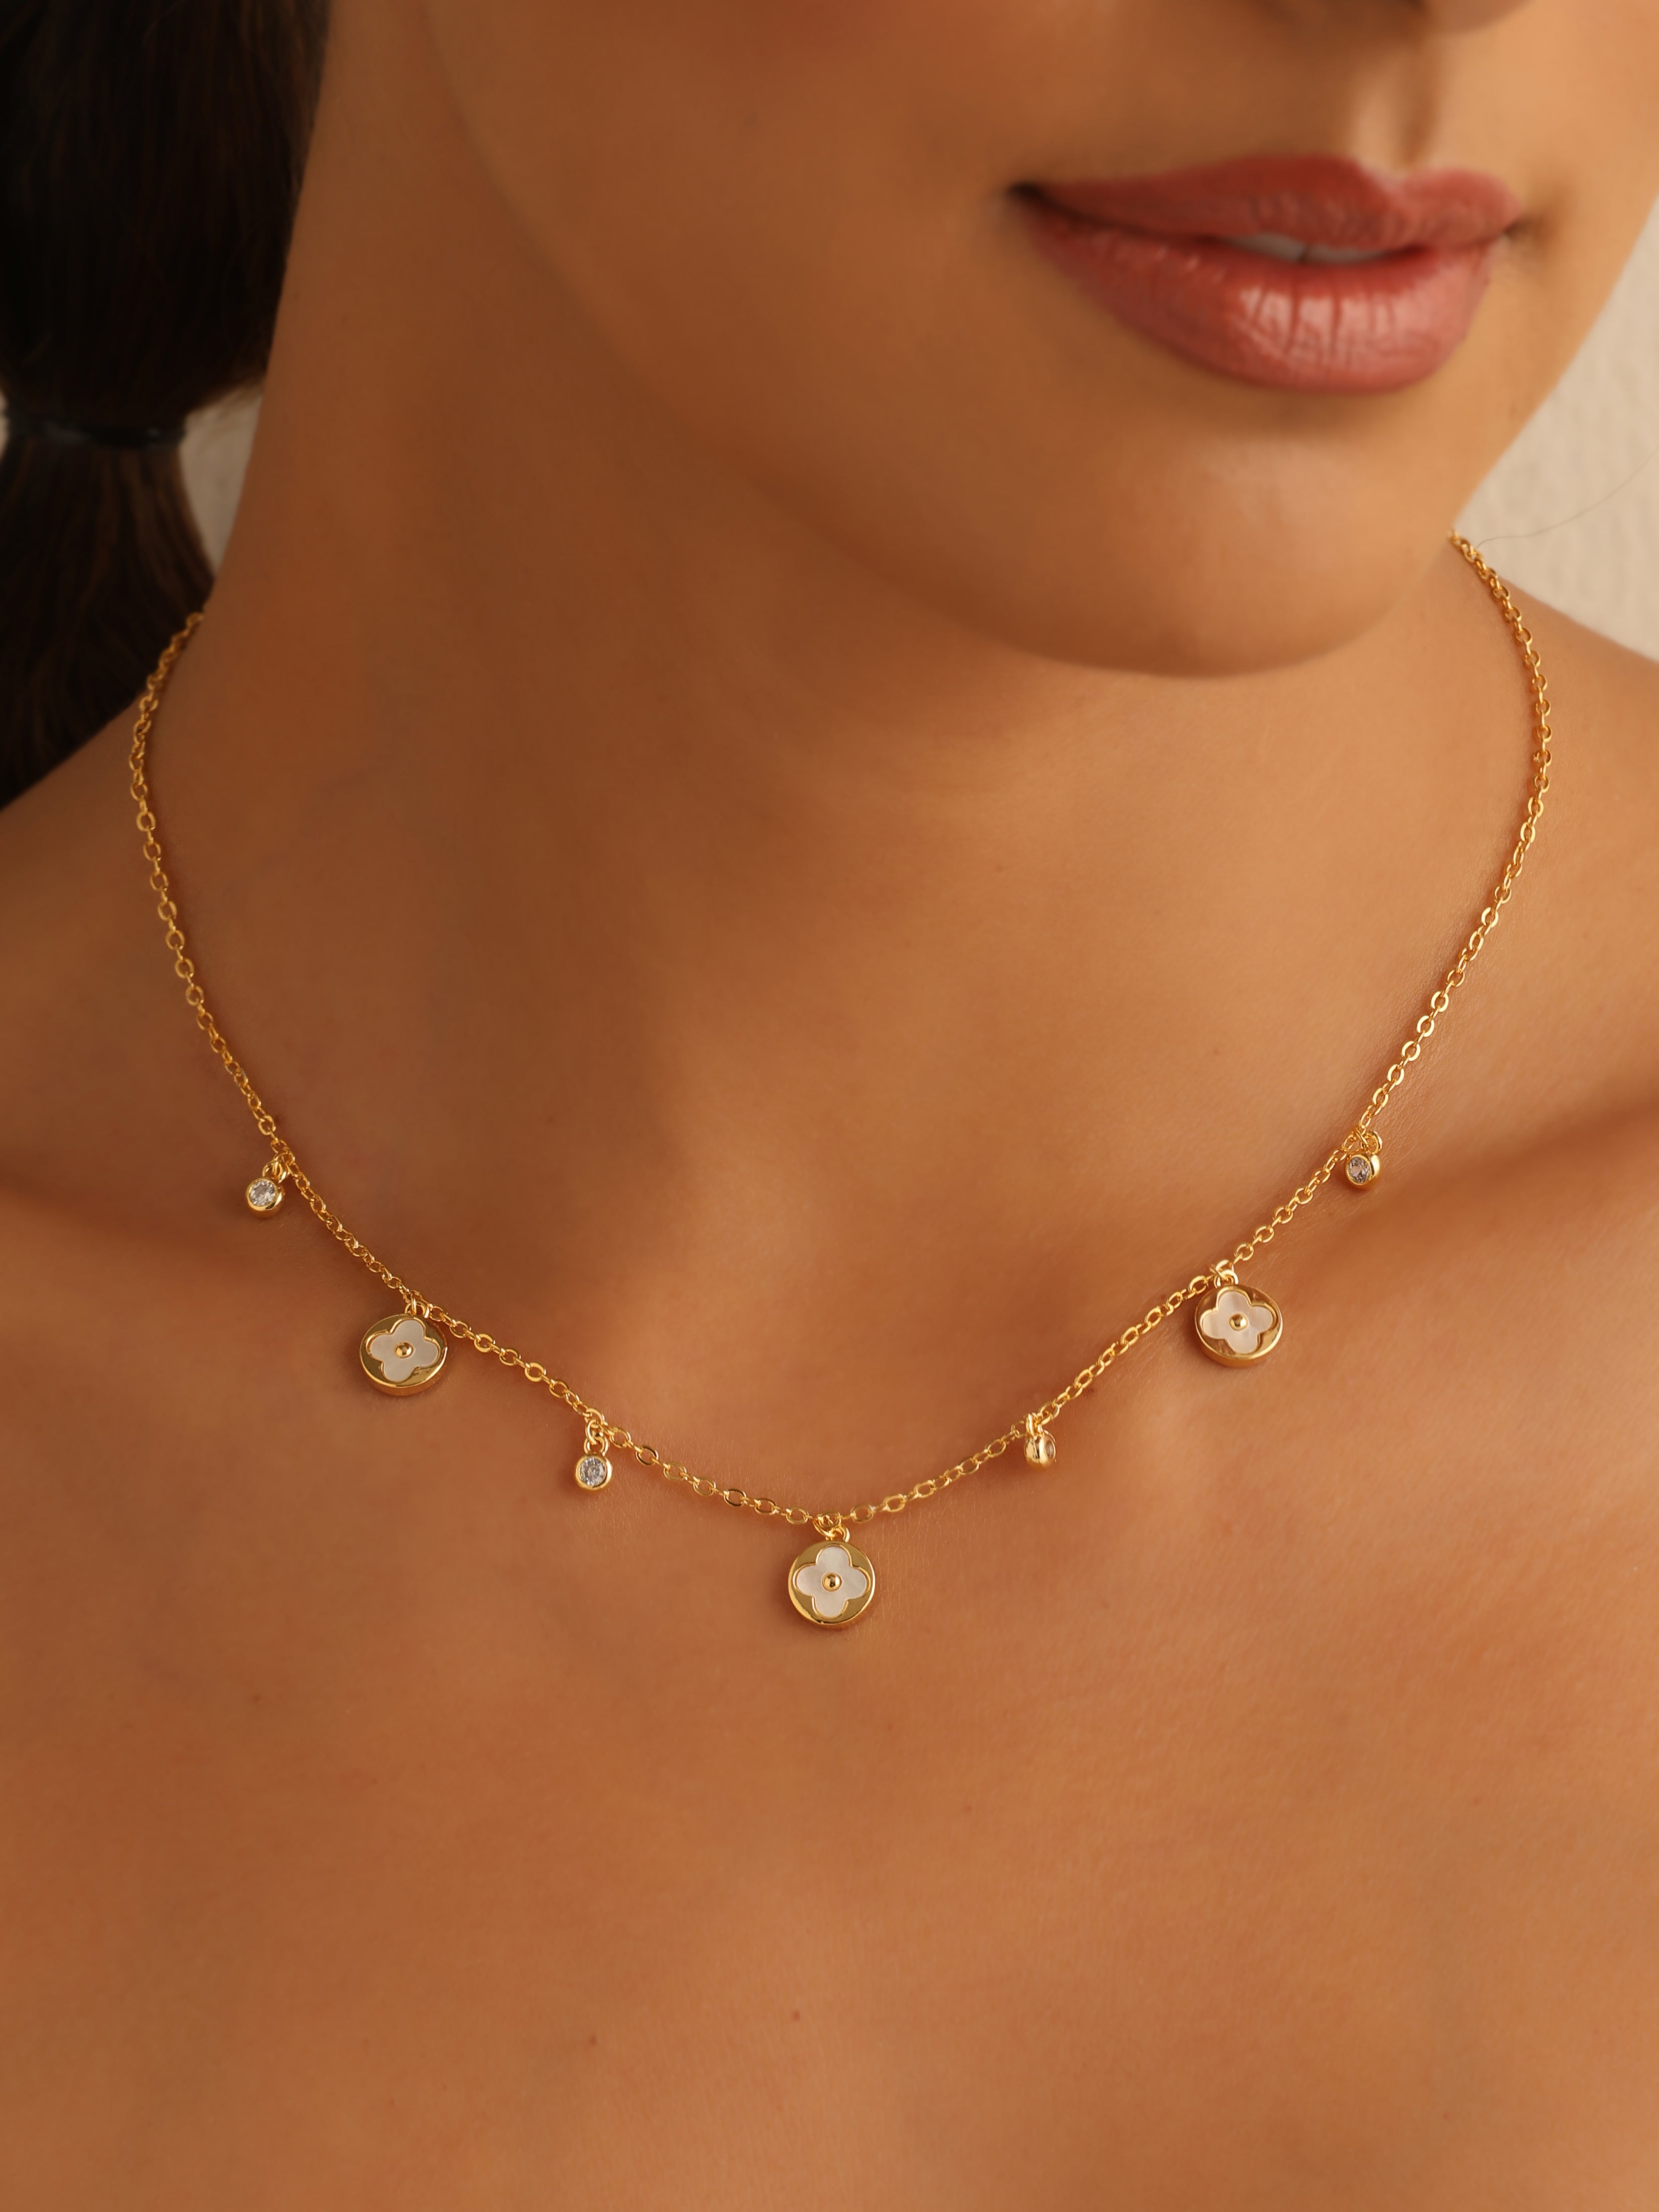 Bay Clovers Necklace